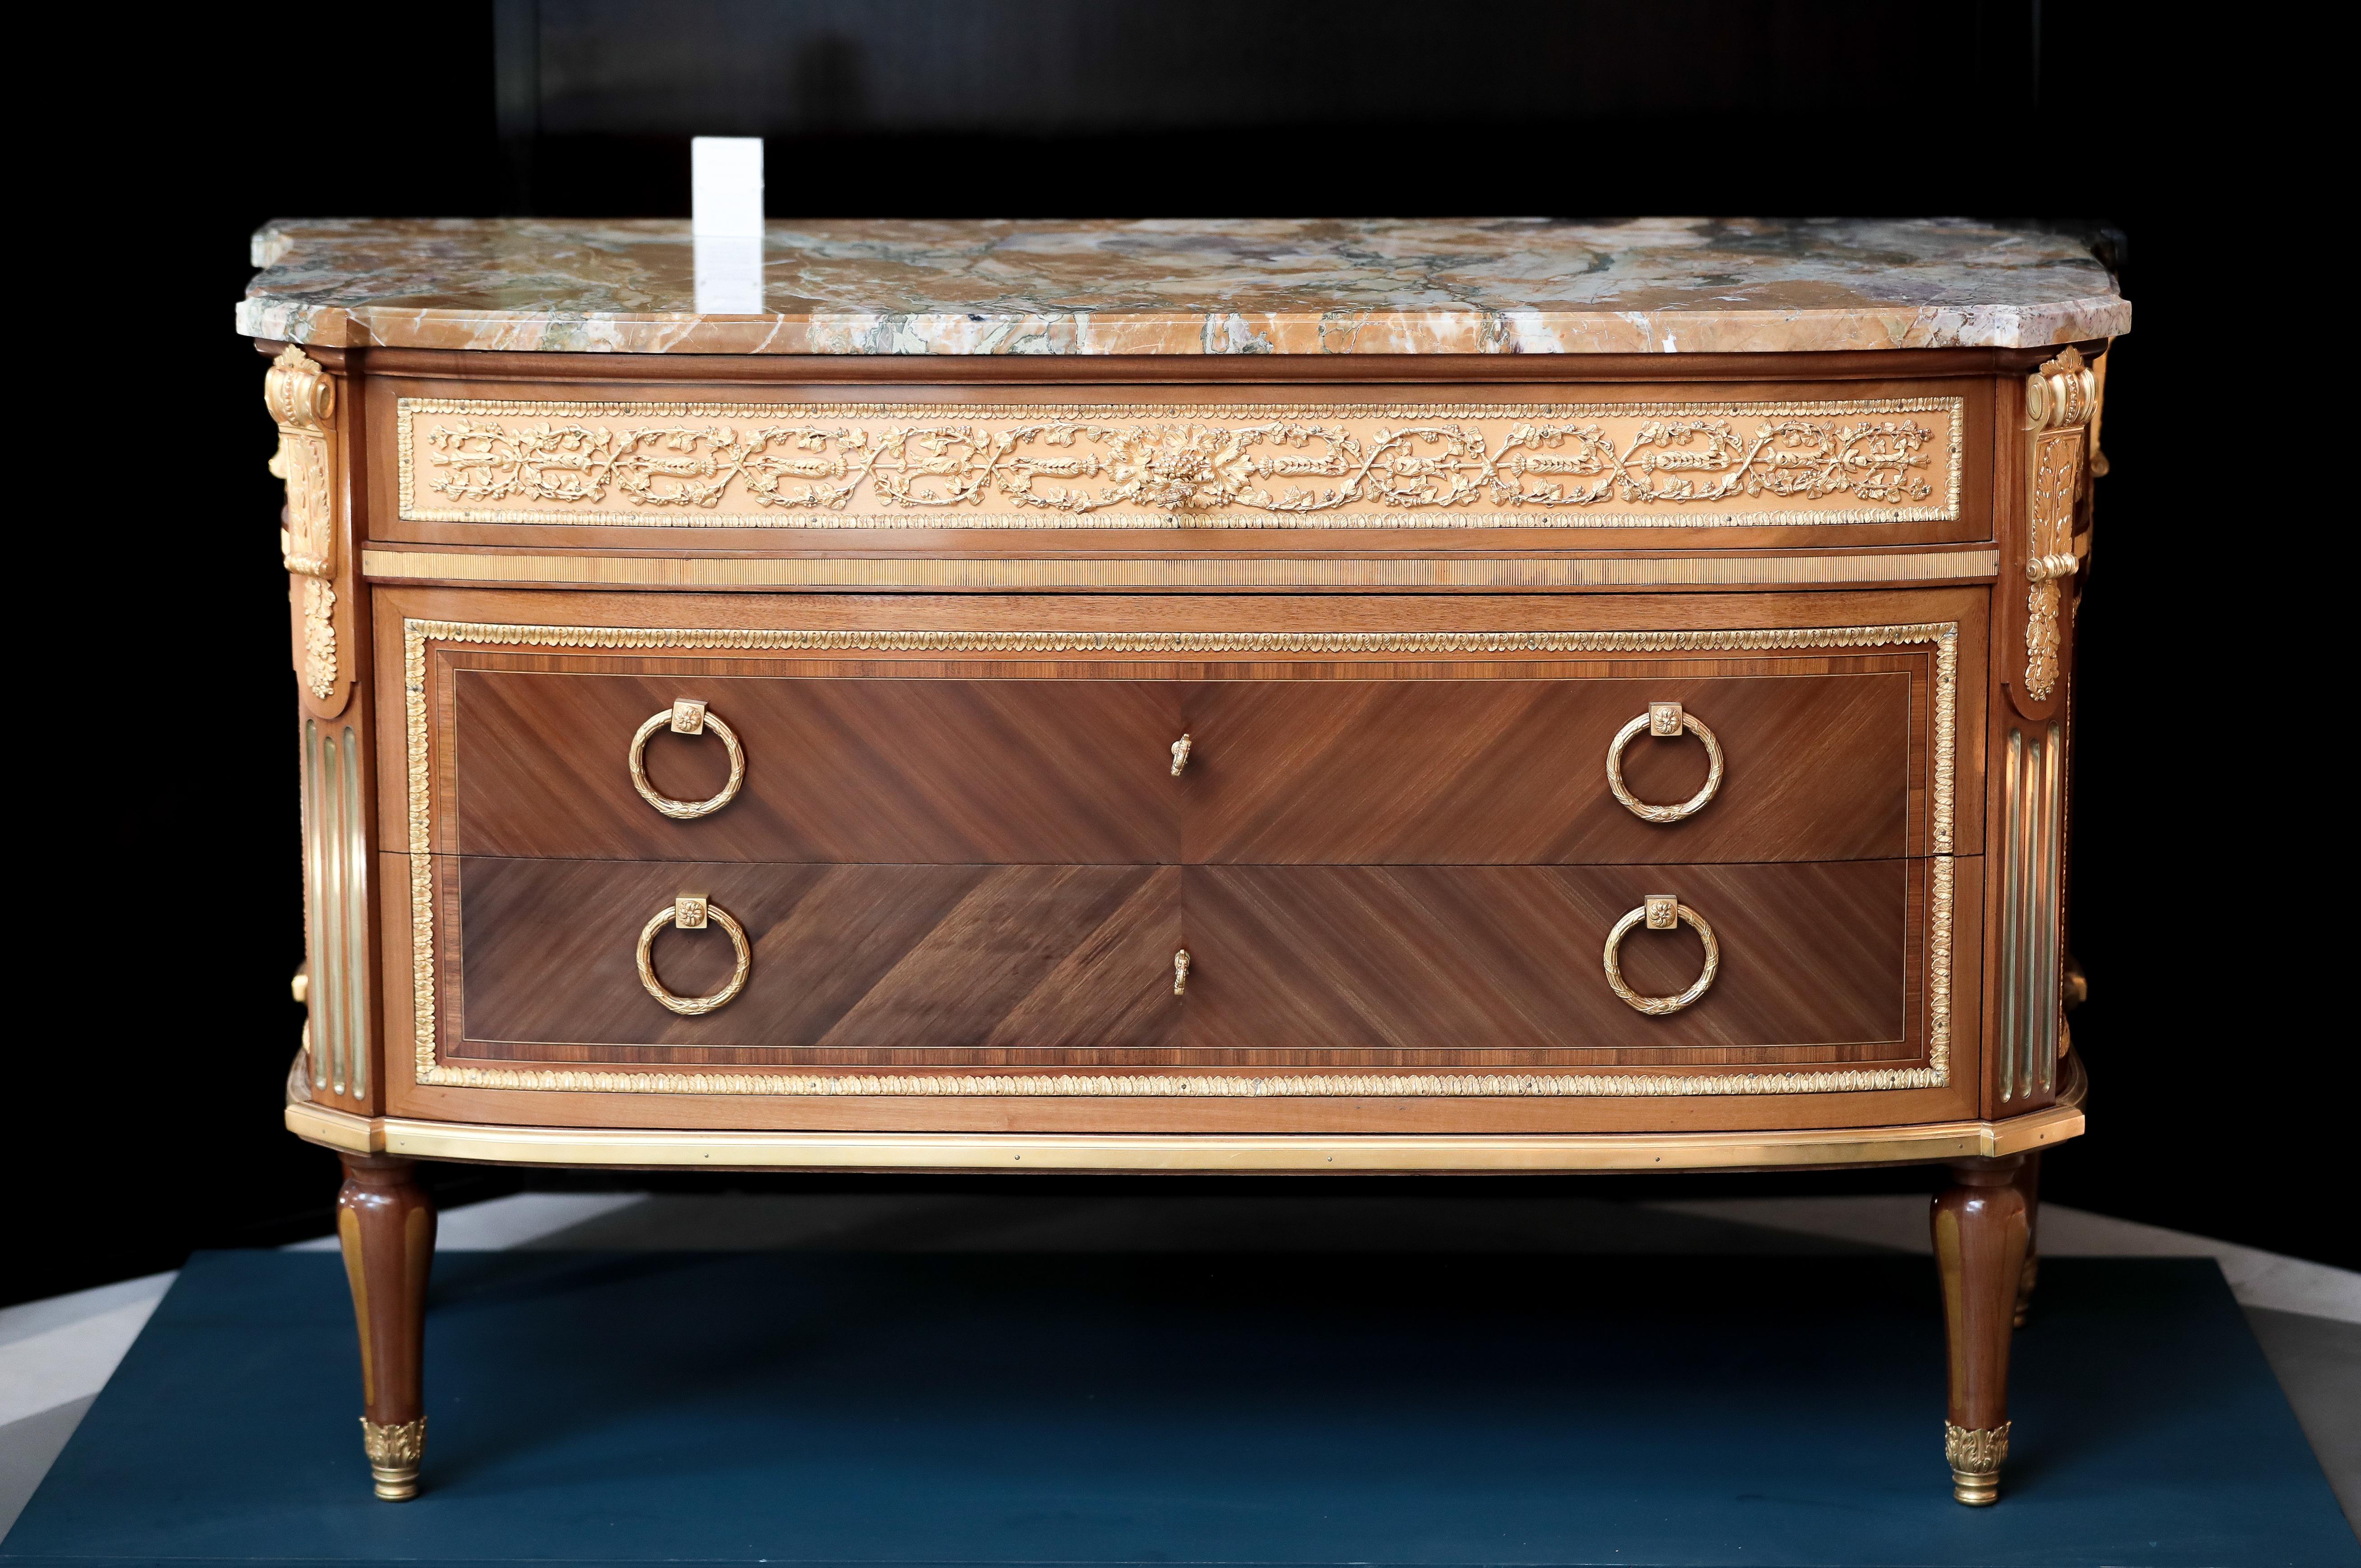 The Trianon chest of drawers is a replica by Rinck of a piece created by Jean Francois Leleu for Marie Antoinette.

Details:

Marble-top
Kingwood and mahogany veneer
Chased gilt bronze ornaments
Varnish finishing.

